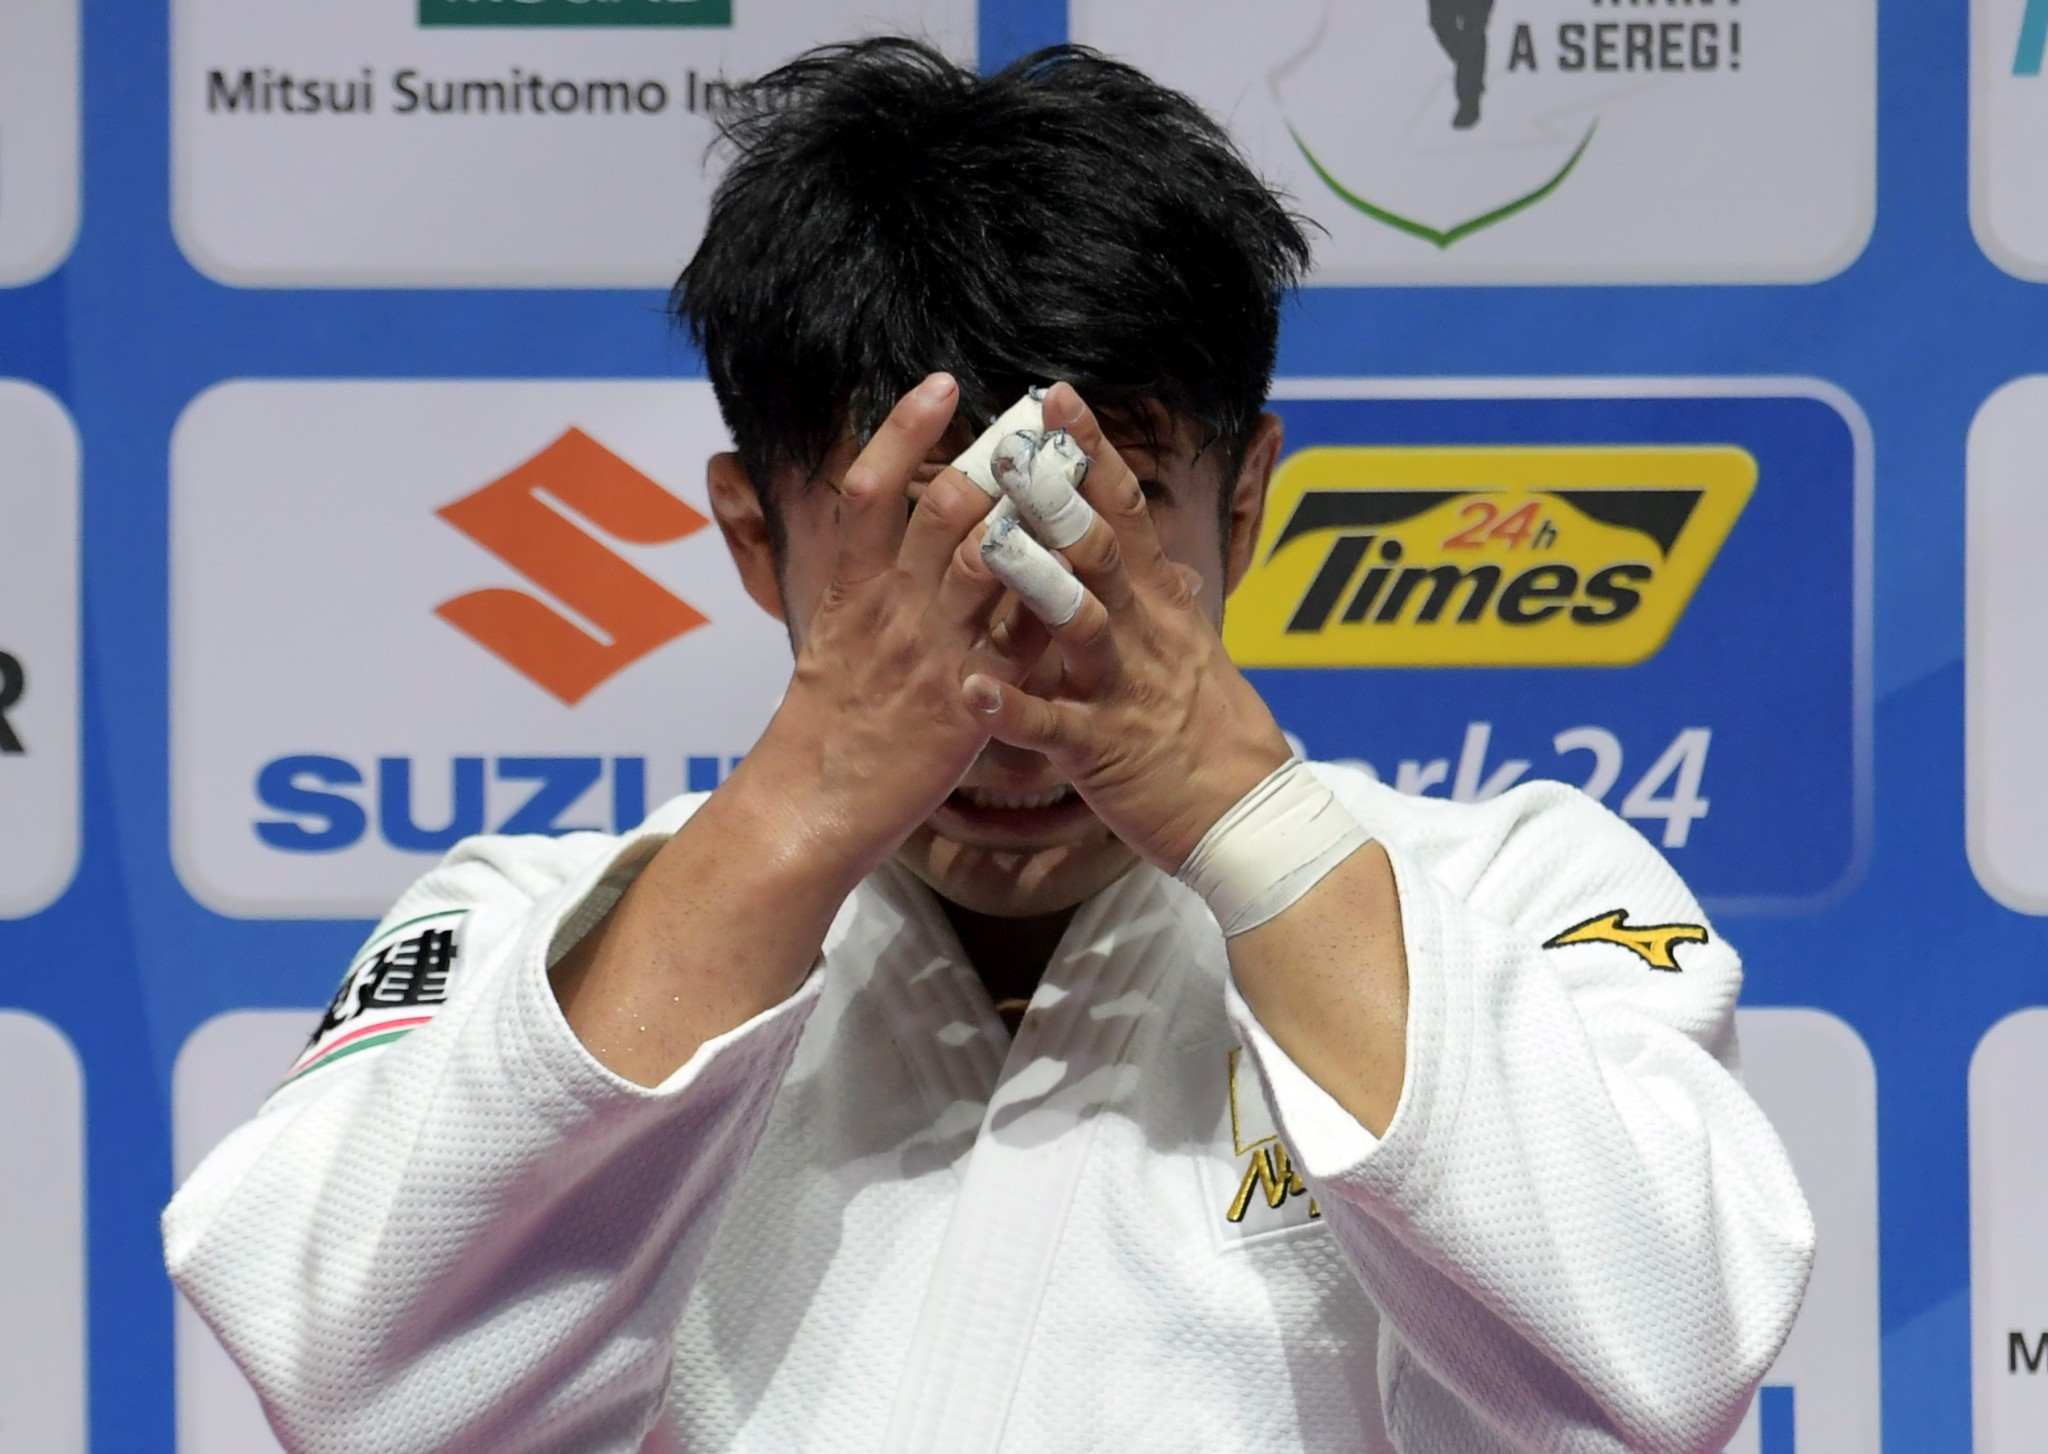 The Japanese star was visibly emotional when he was given his gold medal ©Getty Images